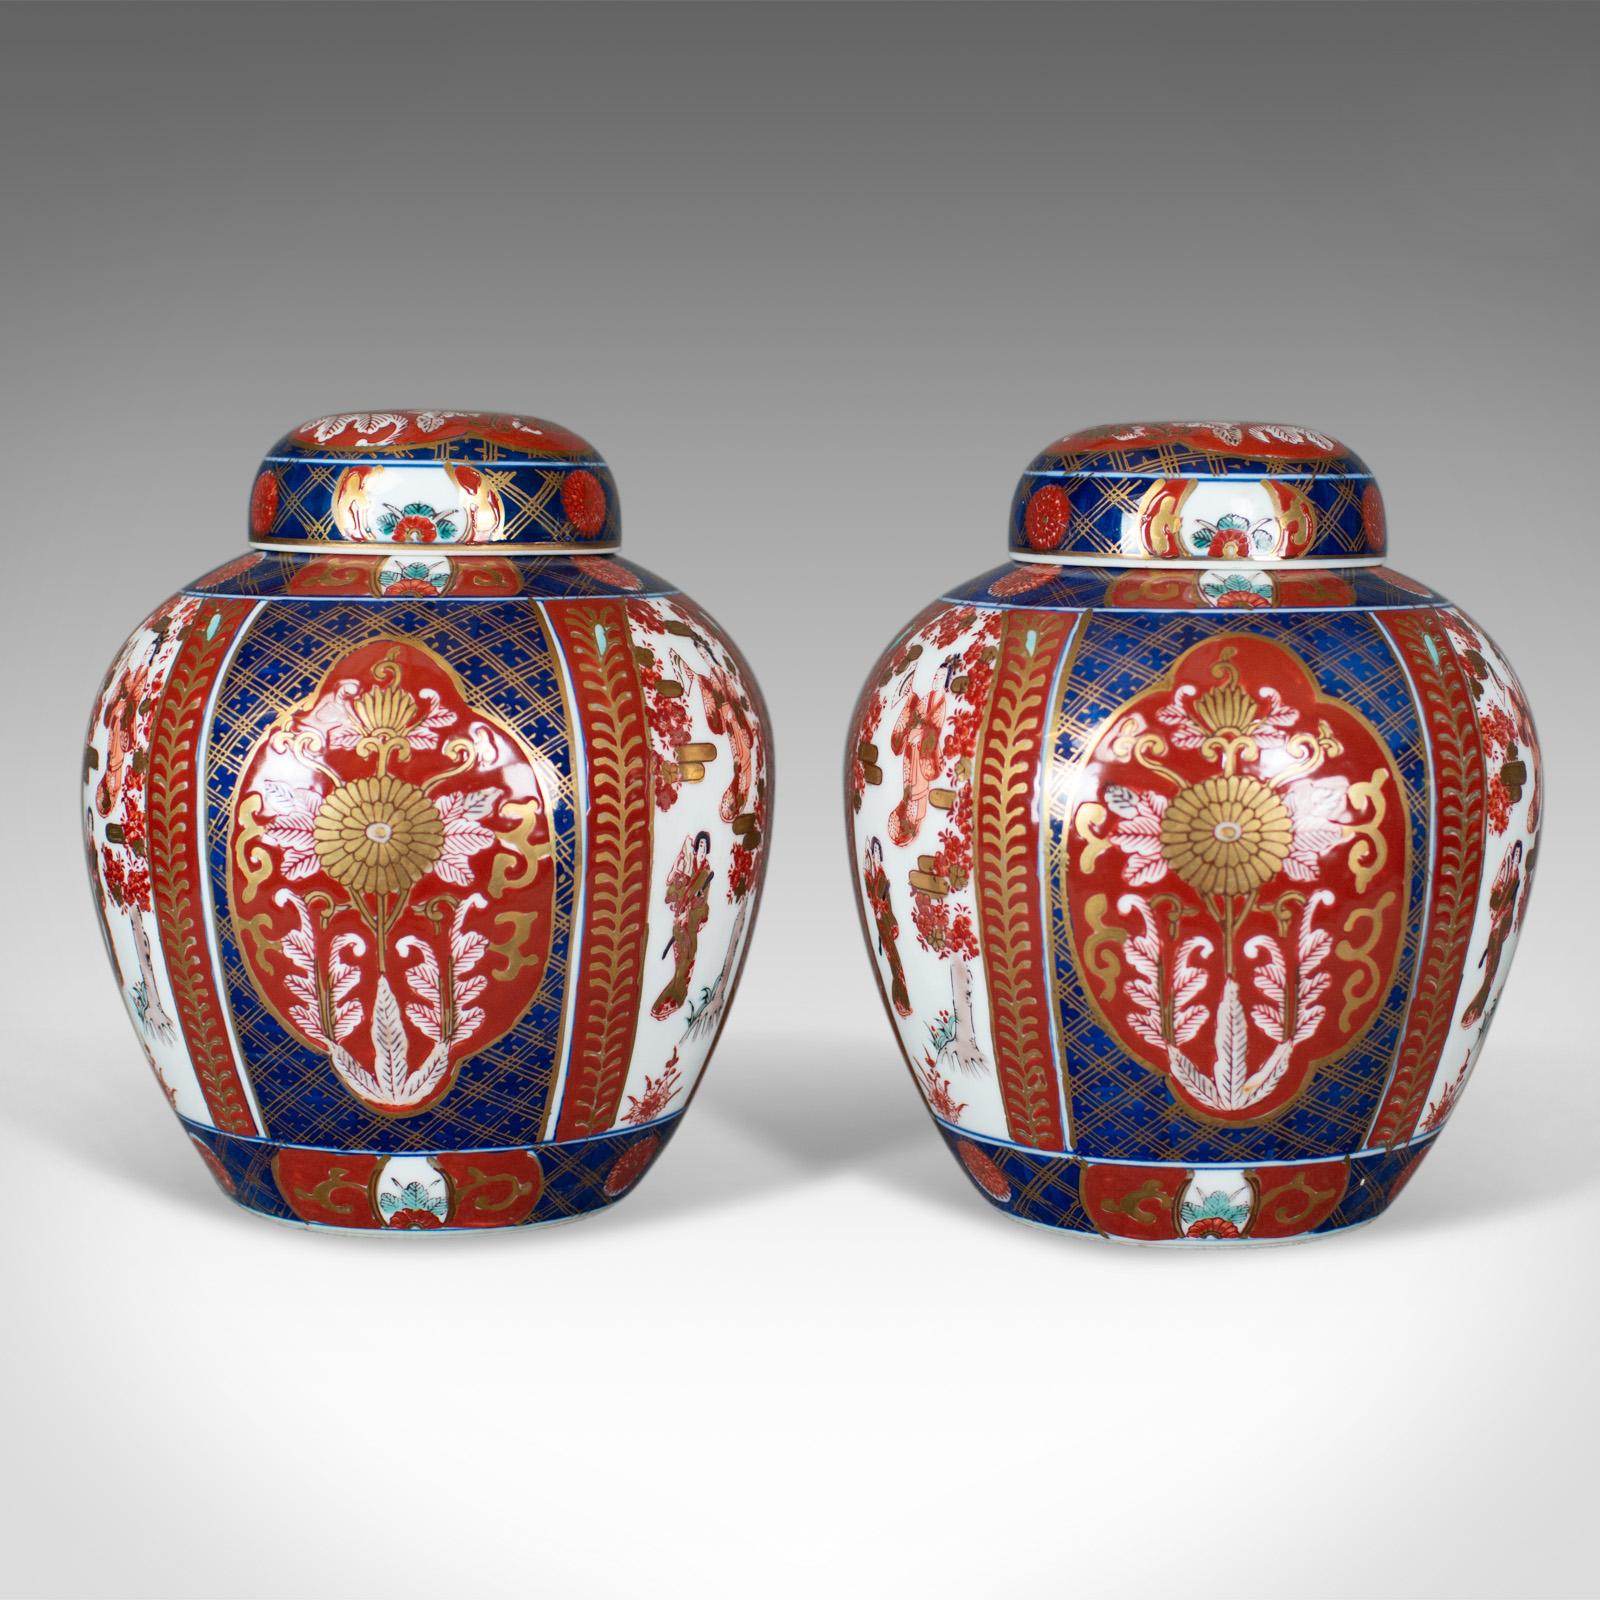 This is a pair of Imari ginger jars, profusely decorated porcelain spice jars with lids, dating to the mid-late 20th century.

Of classic form and in good proportion
Of quality craftsmanship, free from damage
Classic panelled design with mark to